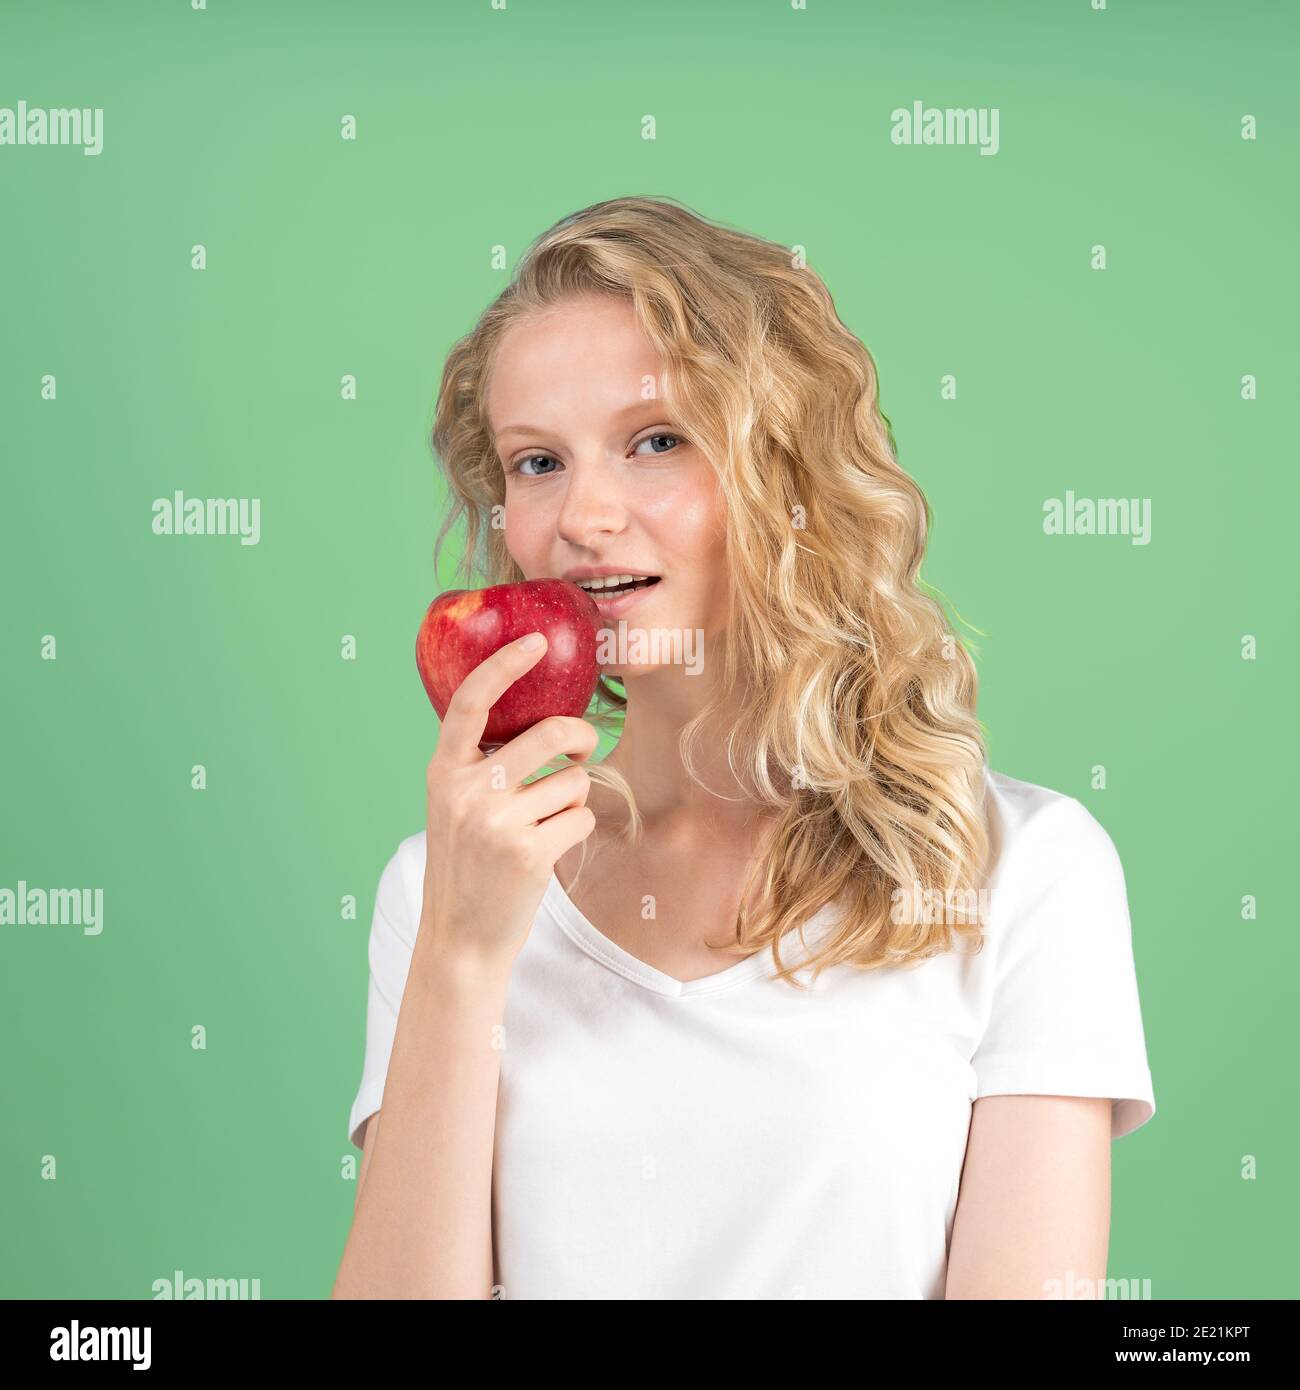 Portrait of young smiling woman bitting red apple againt green wall background. Fresh face Stock Photo